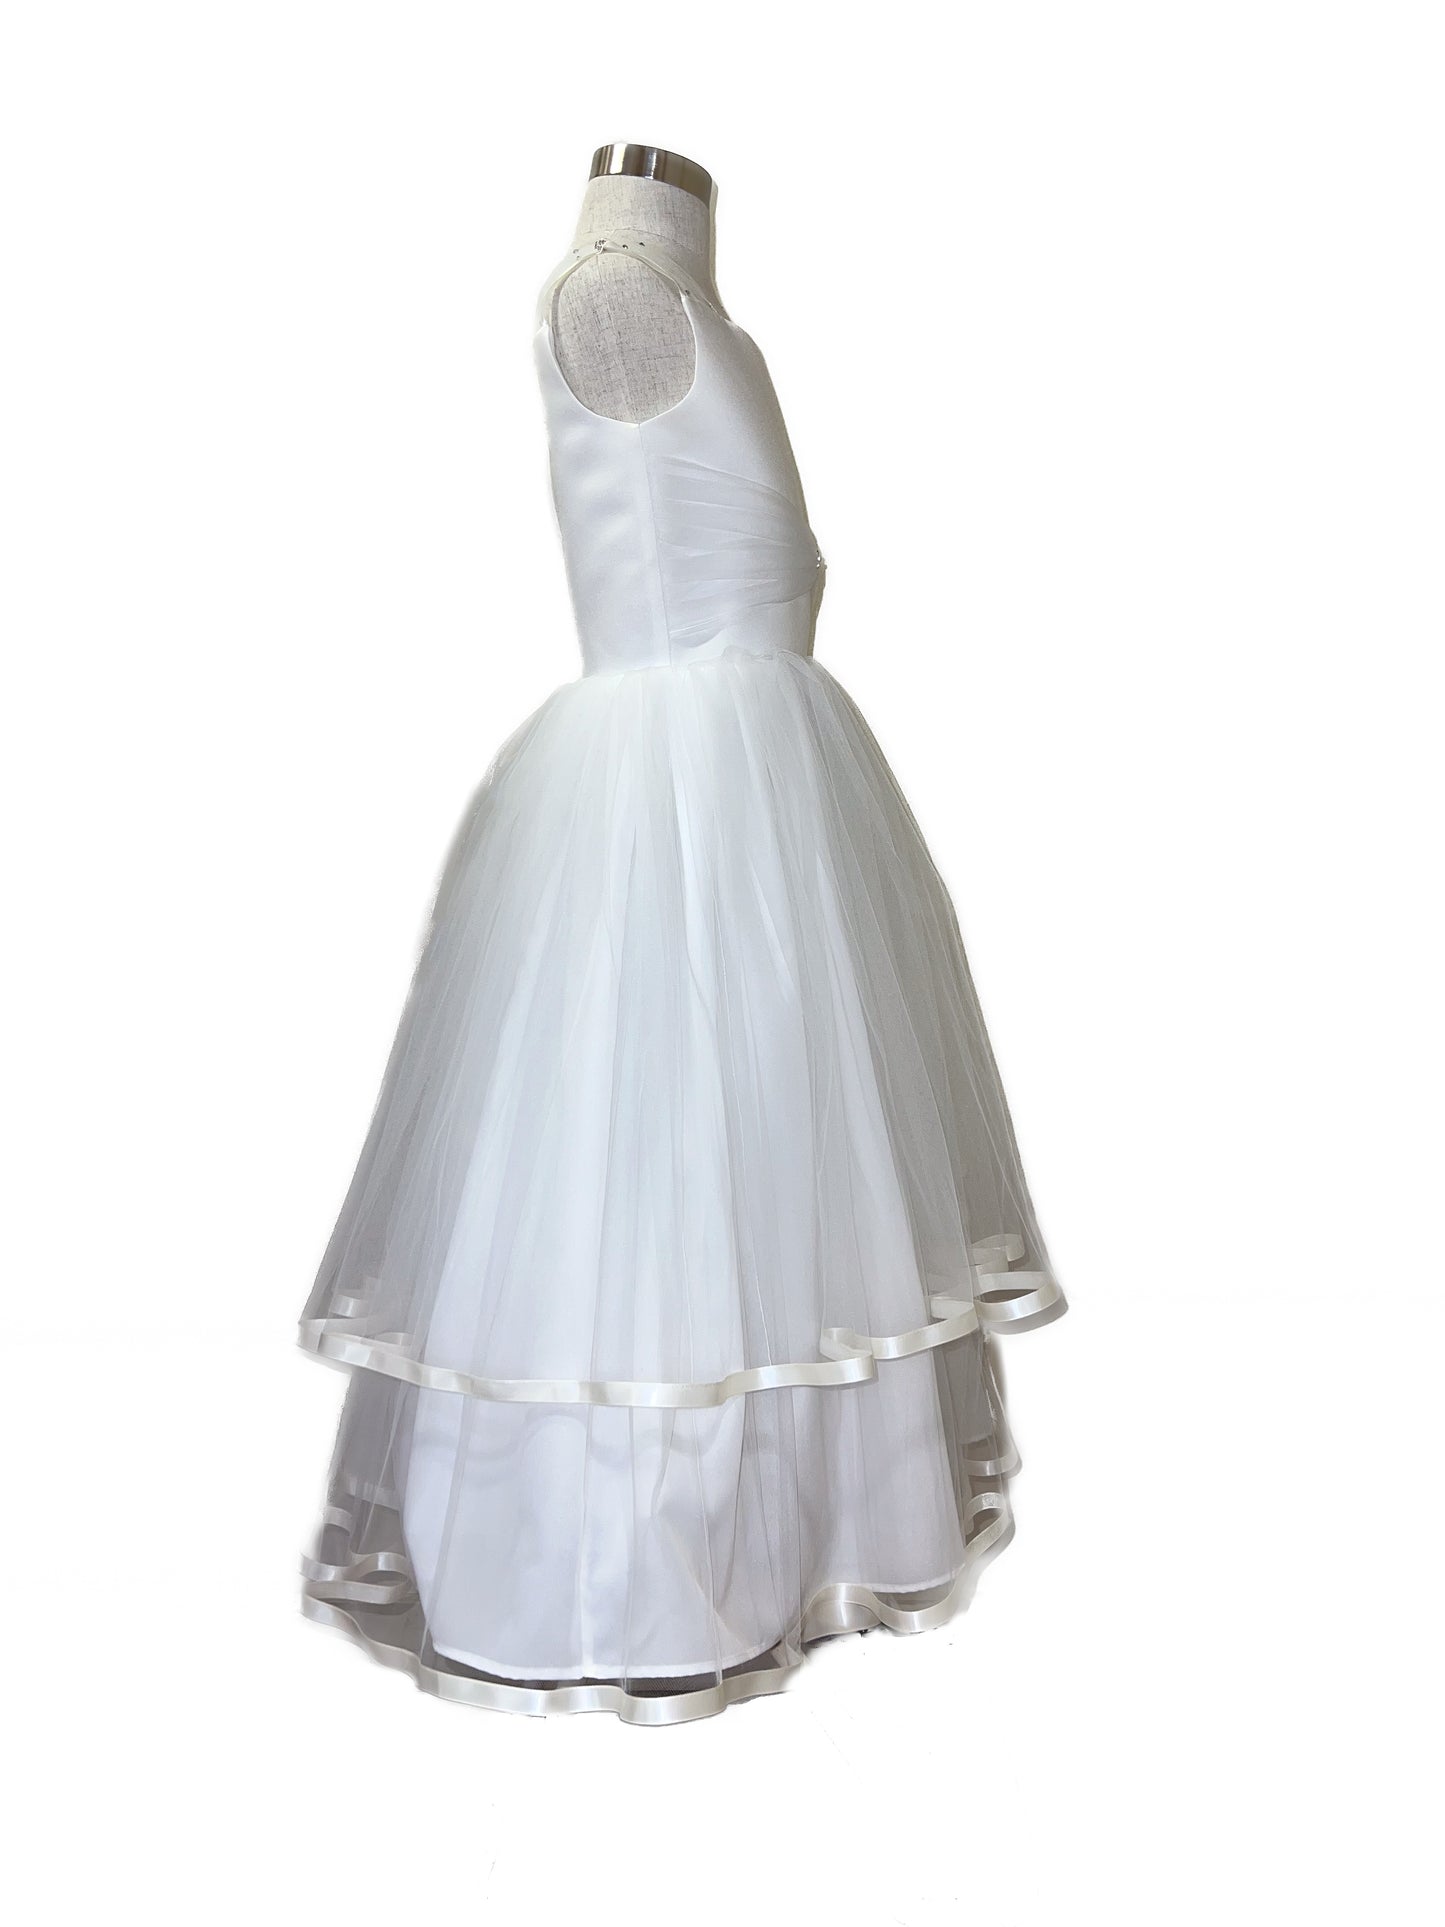 Tulle and Satin w Double Ruffle Skirt Communion Dress